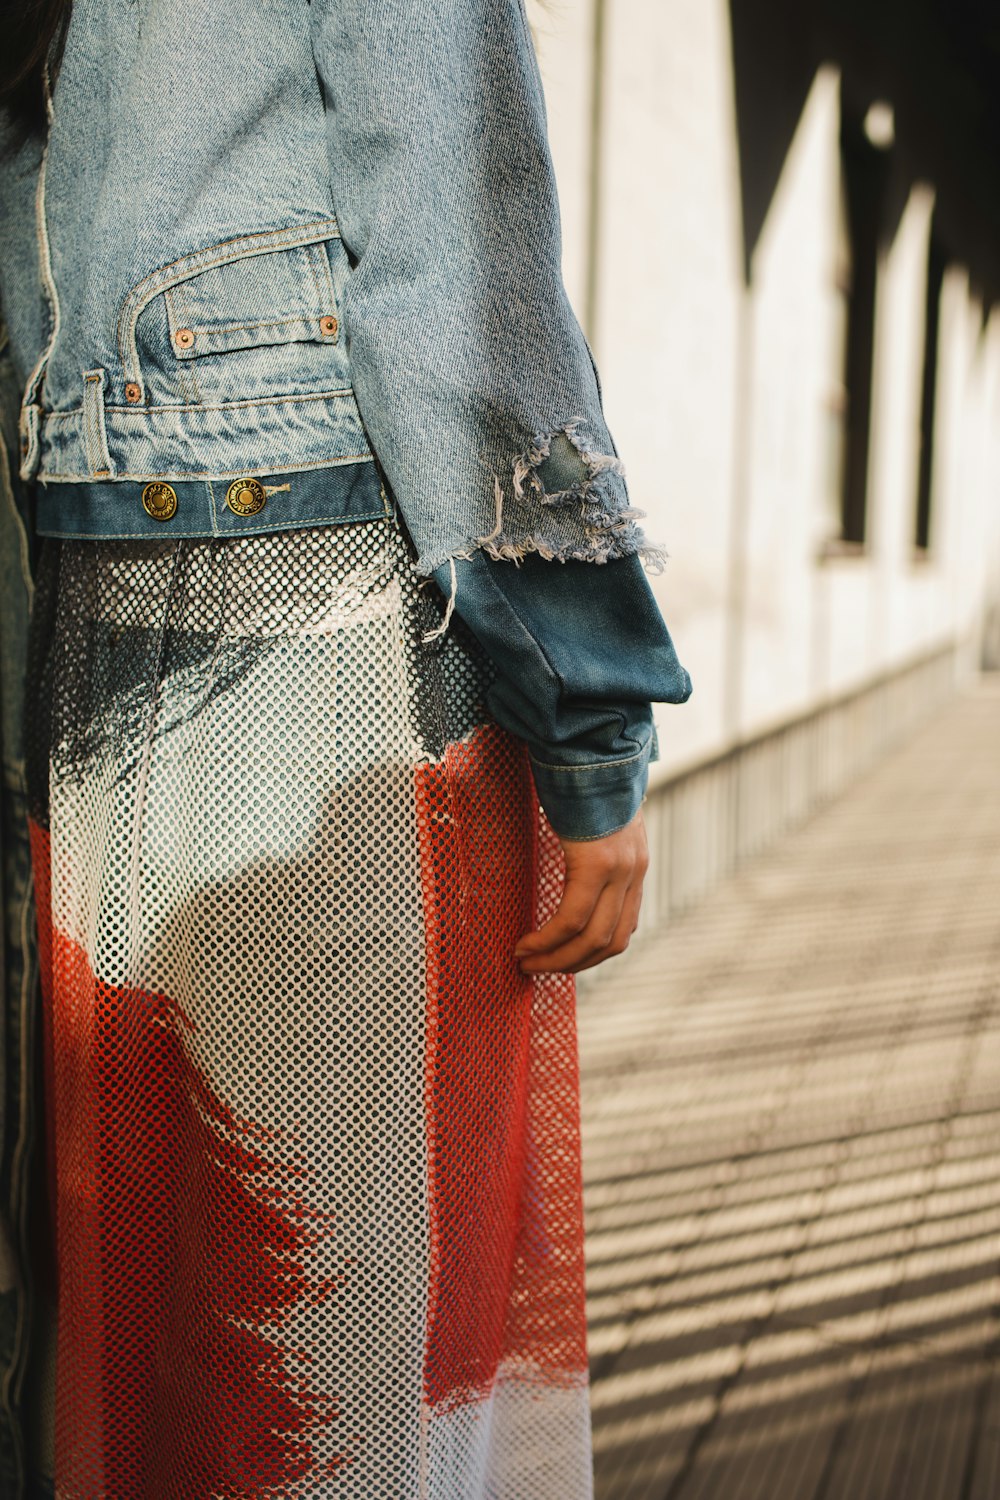 a woman wearing a jean jacket and a colorful skirt